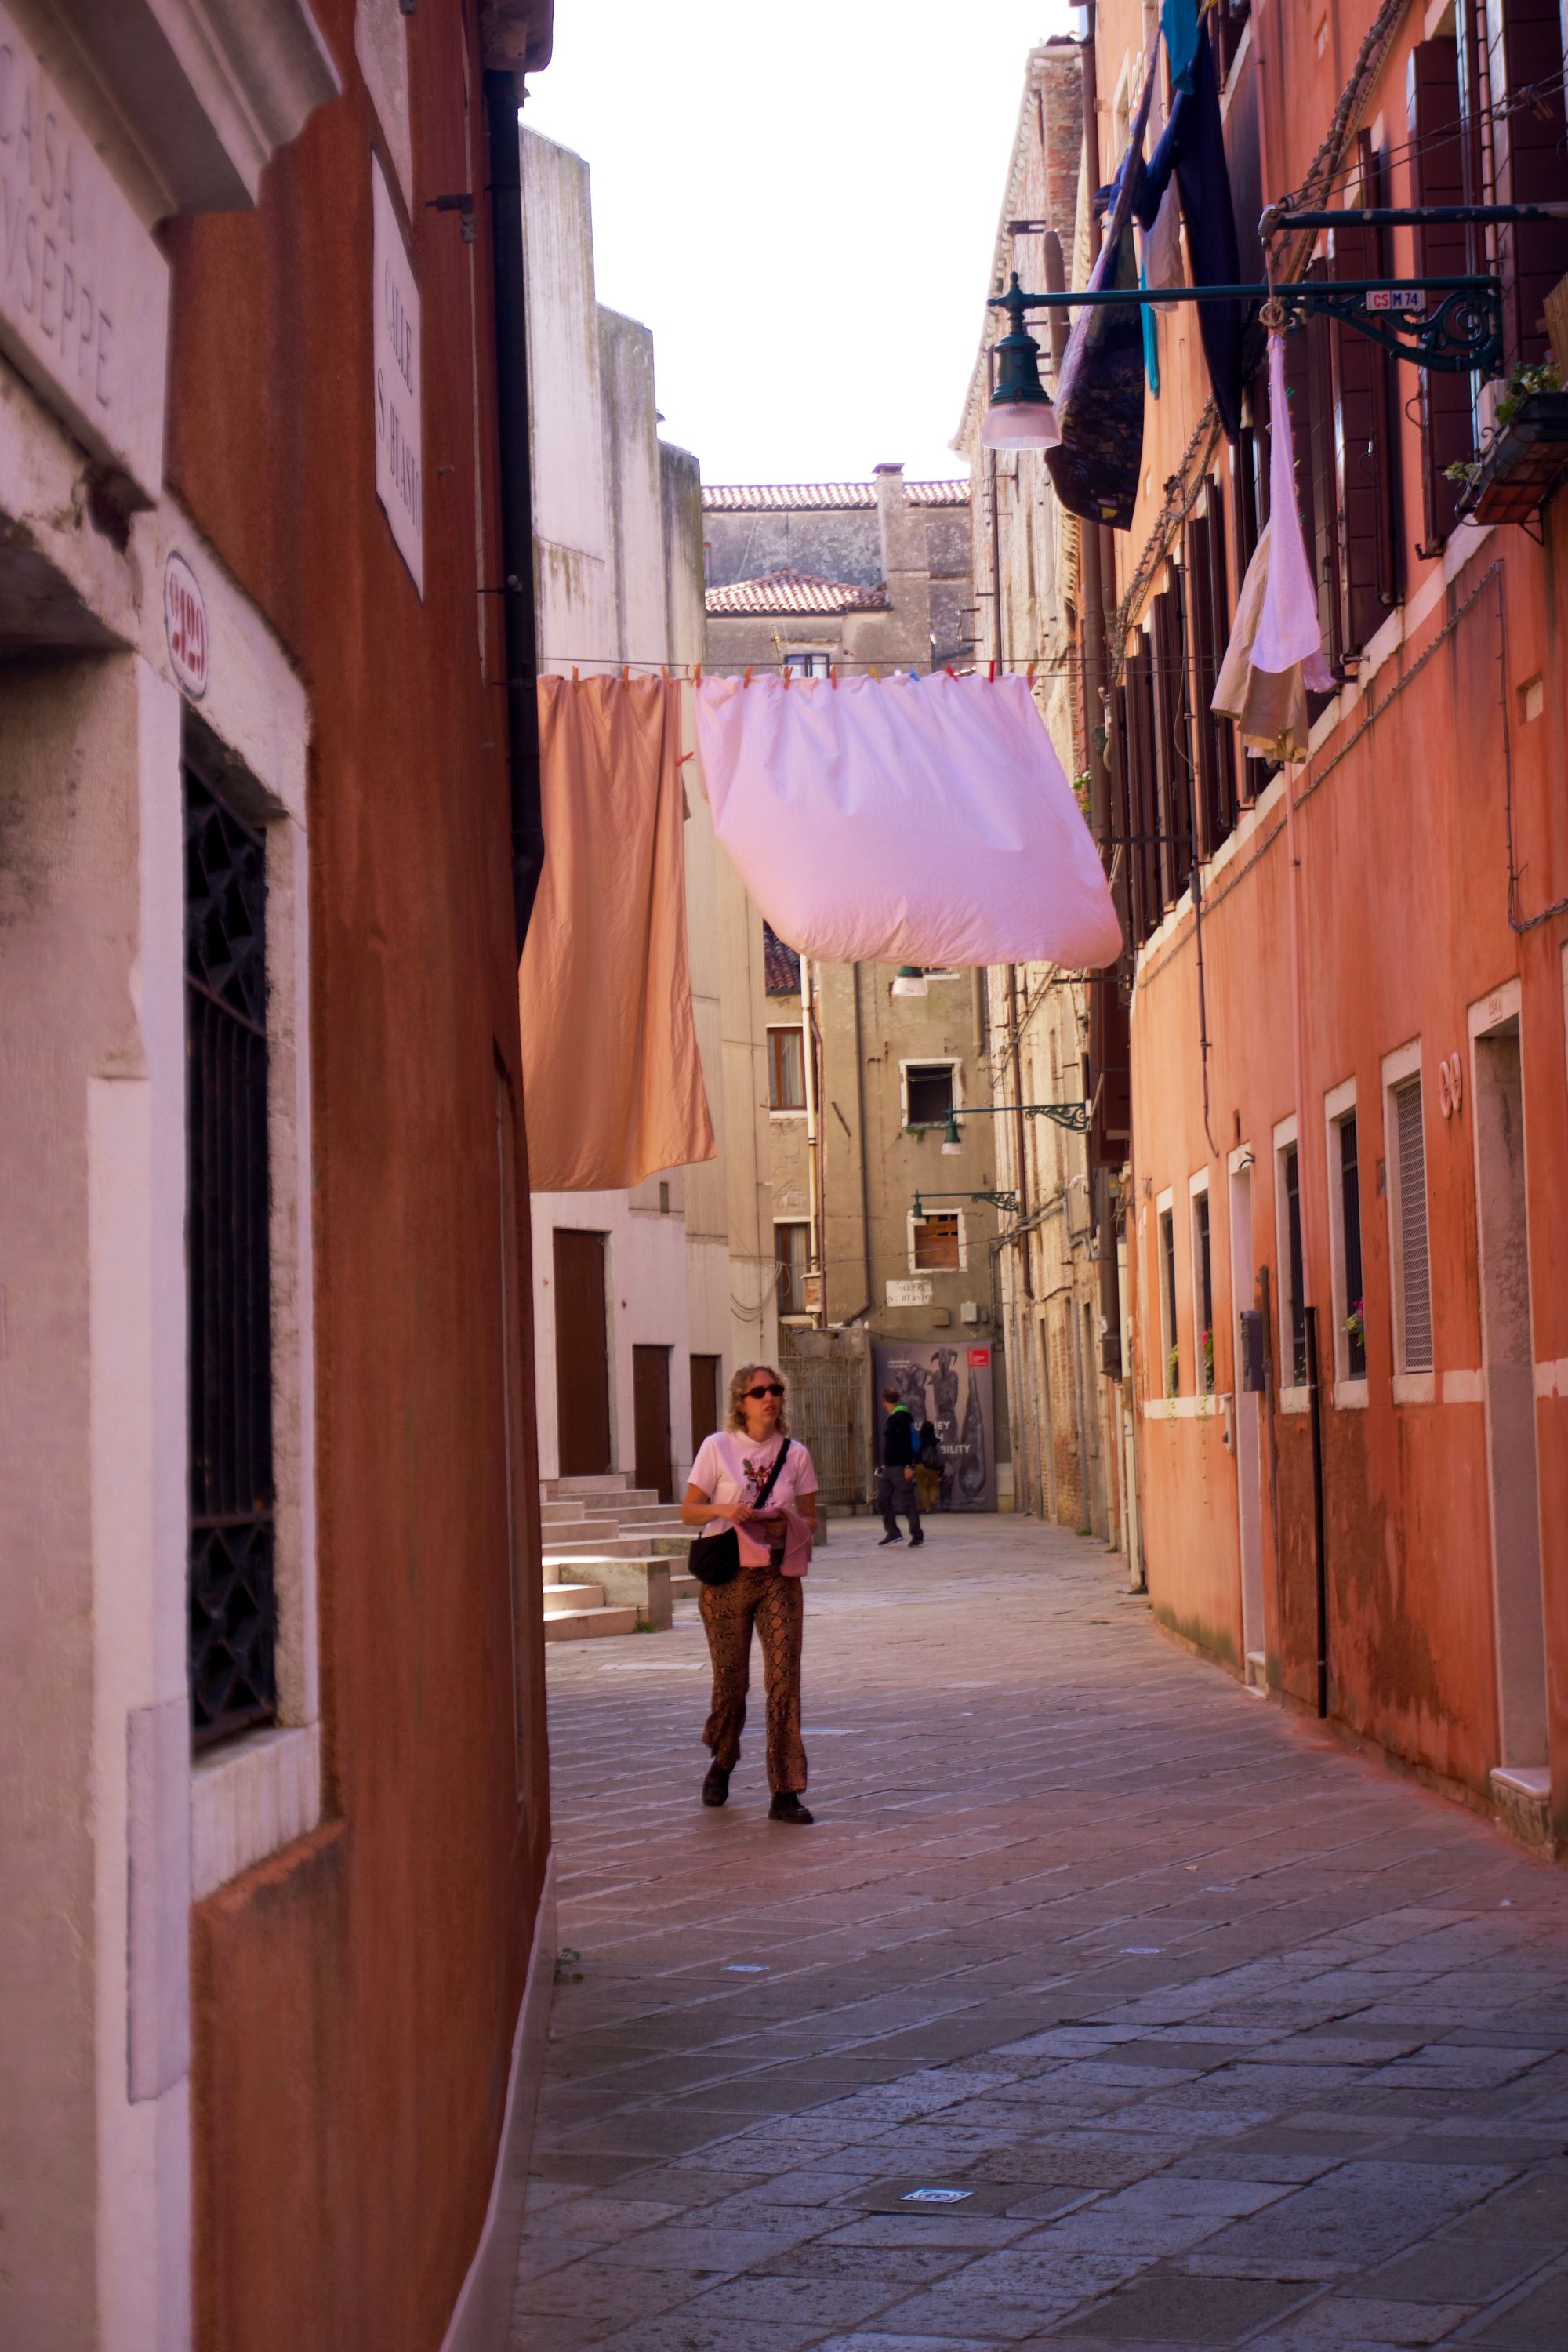 A person in a grey t-shirt and brown flared trousers walks down a narrow pedestrian street with terracotta-coloured houses on either side. Above their head, a washing line hangs, with a brown and pink bedsheet flying from them attached with red pegs.